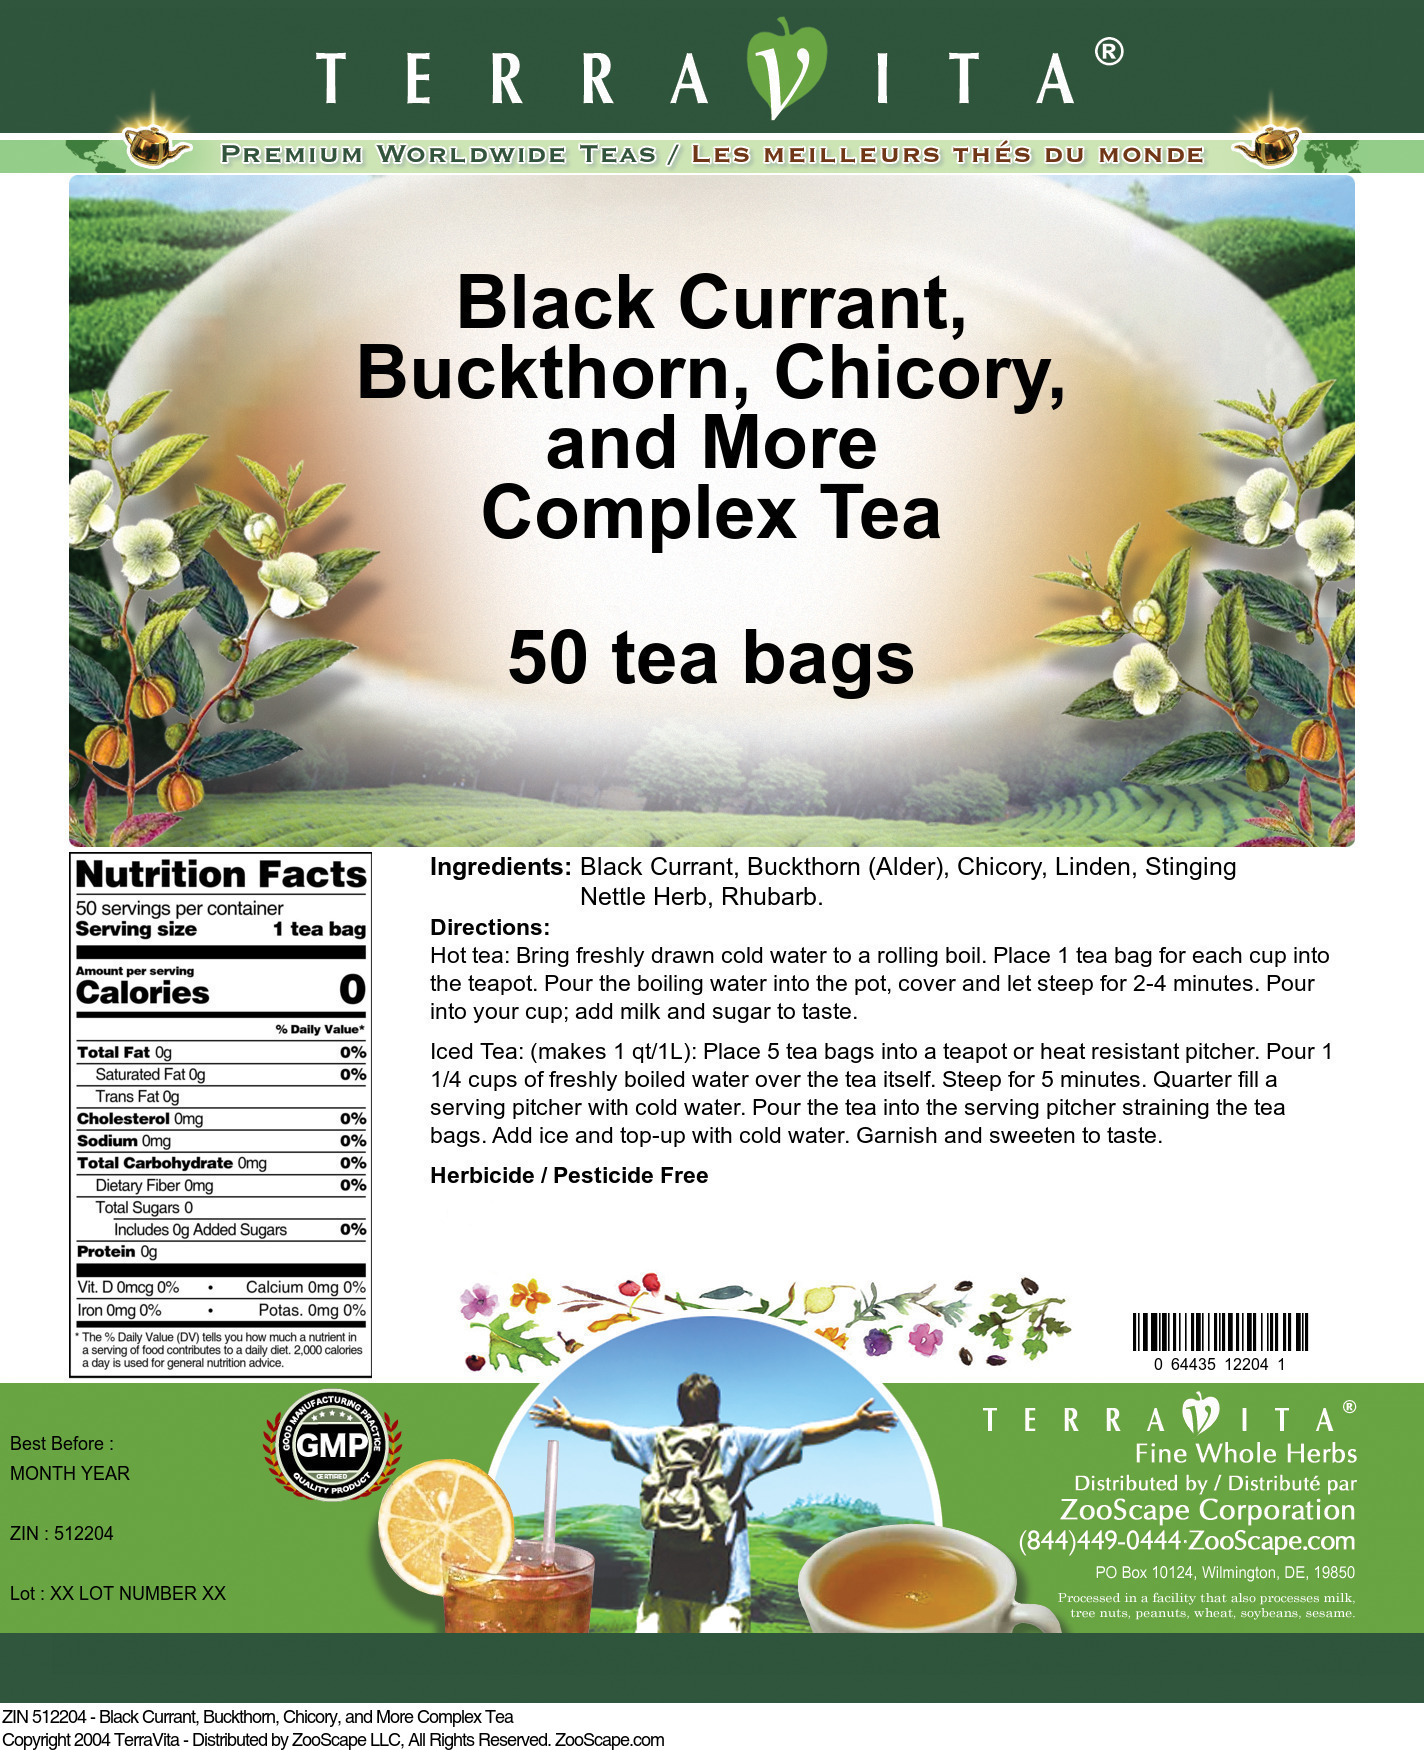 Black Currant, Buckthorn, Chicory, and More Complex Tea - Label